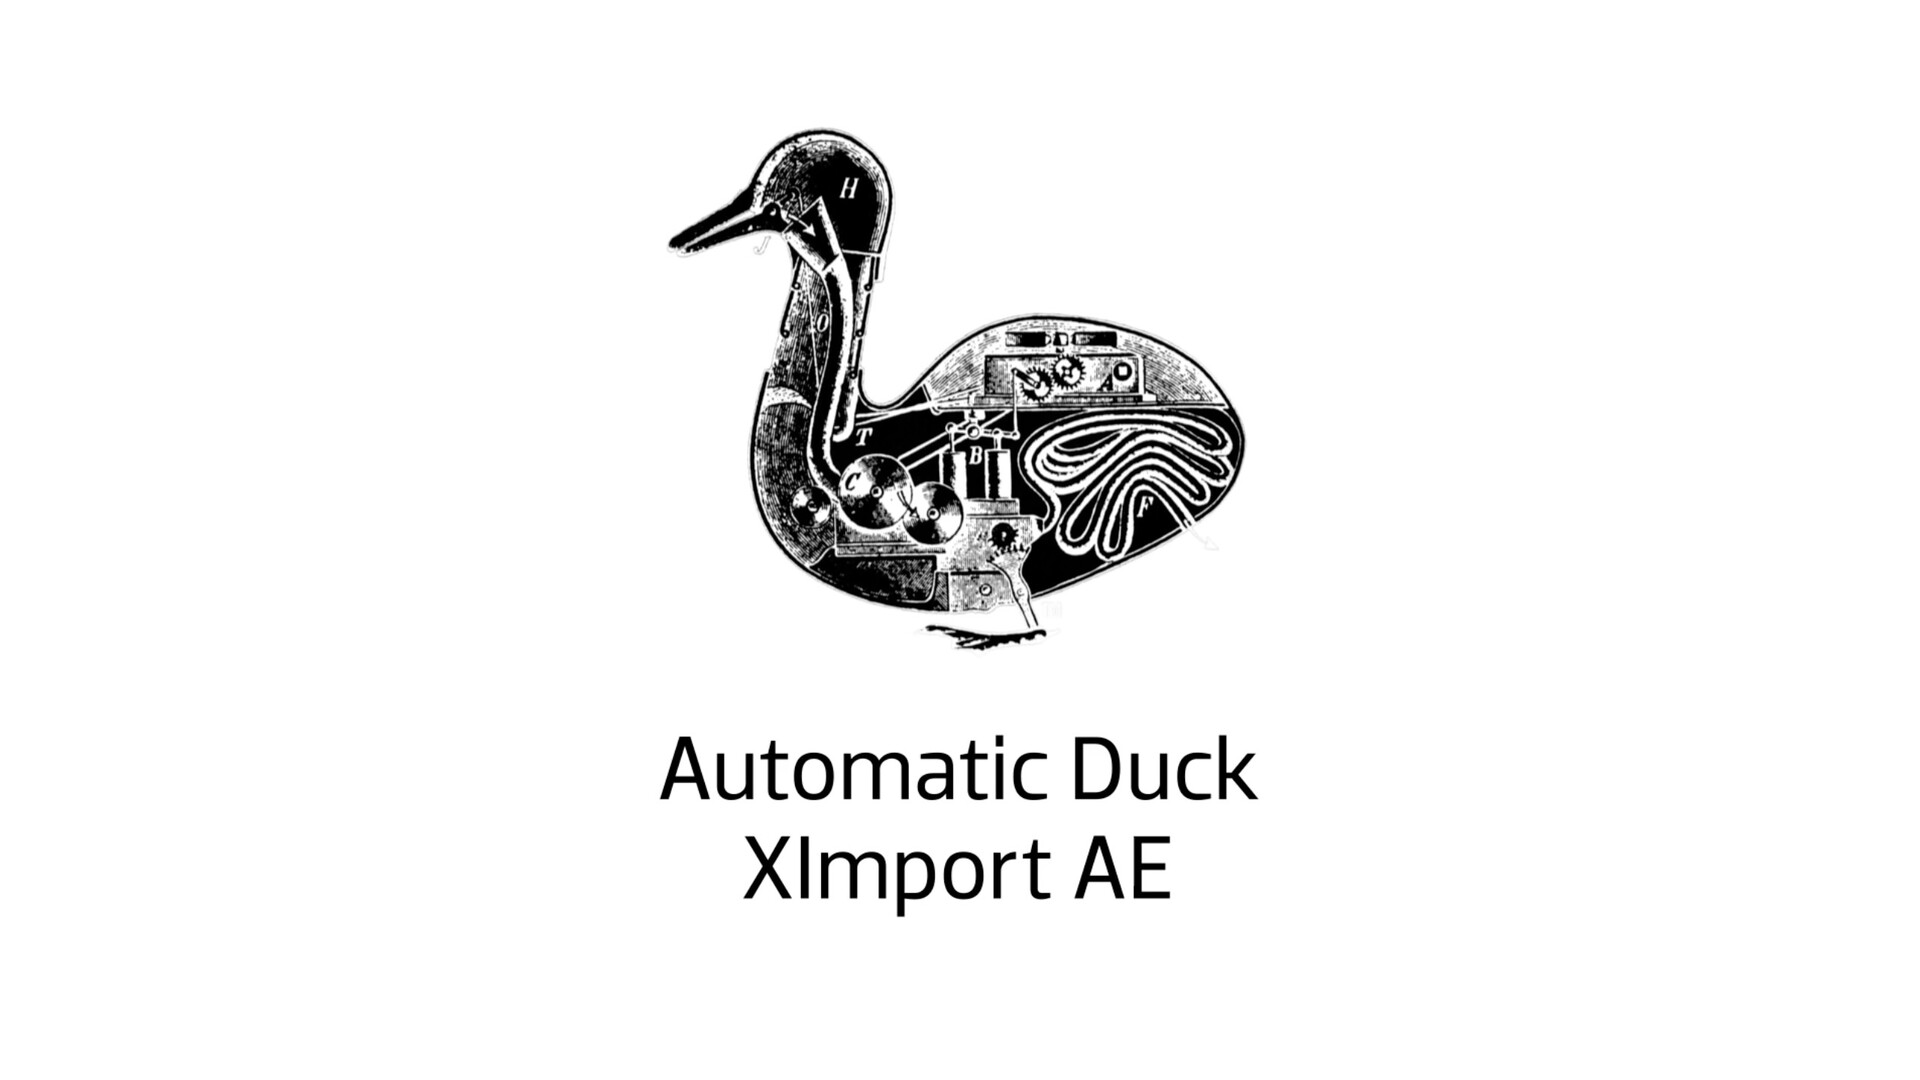 fcpx插件Automatic Duck Ximport AE(fcpx至AE项目迁移工具)